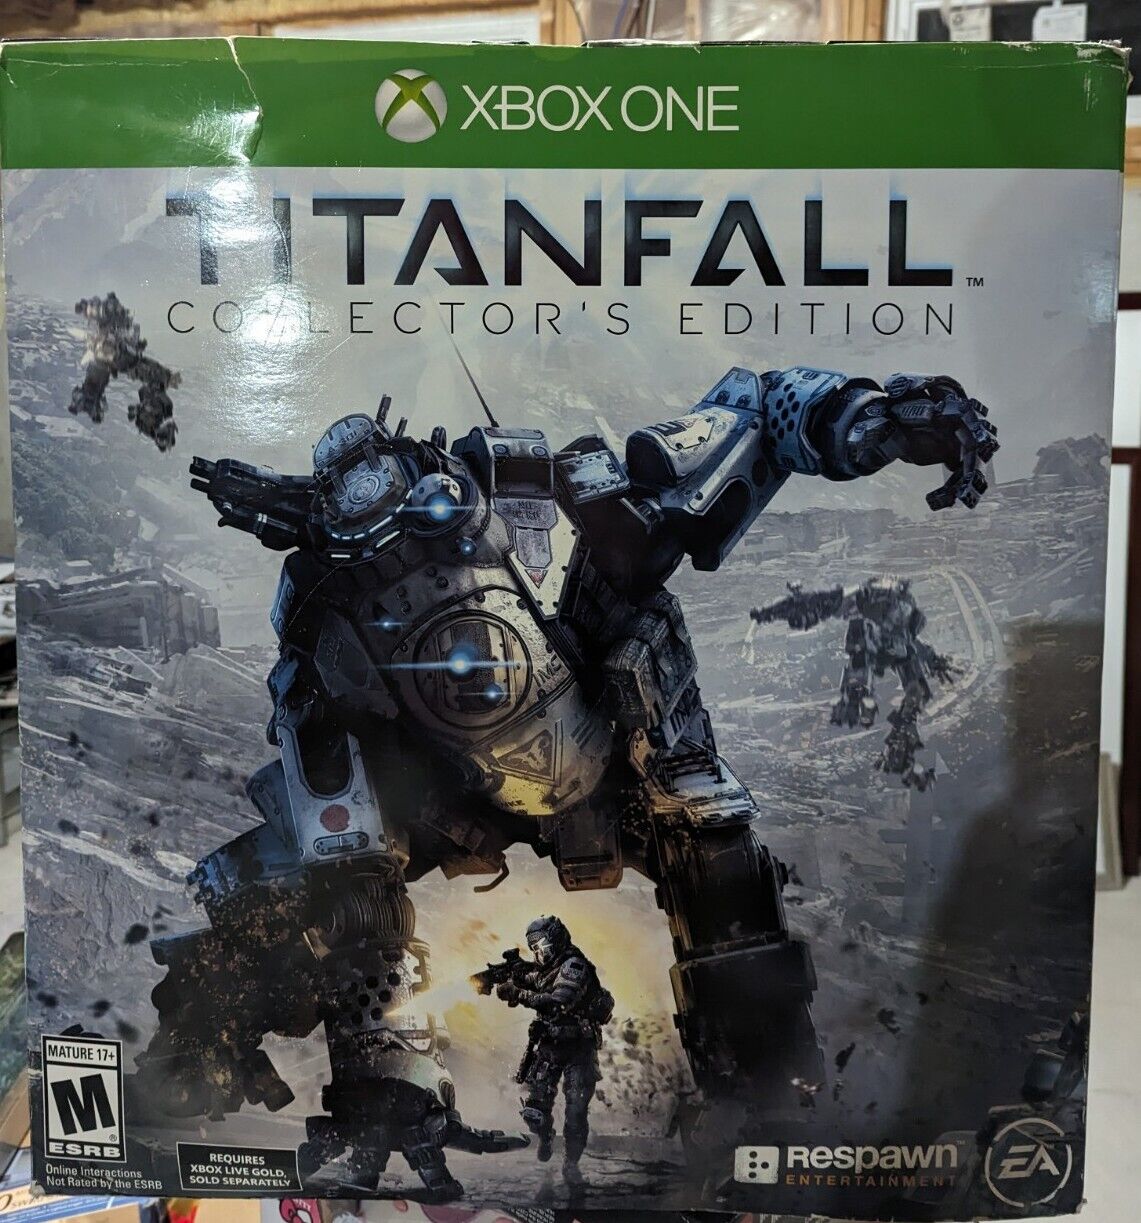 Titanfall -- Collector's Edition (Microsoft Xbox One, 2014) Brand New